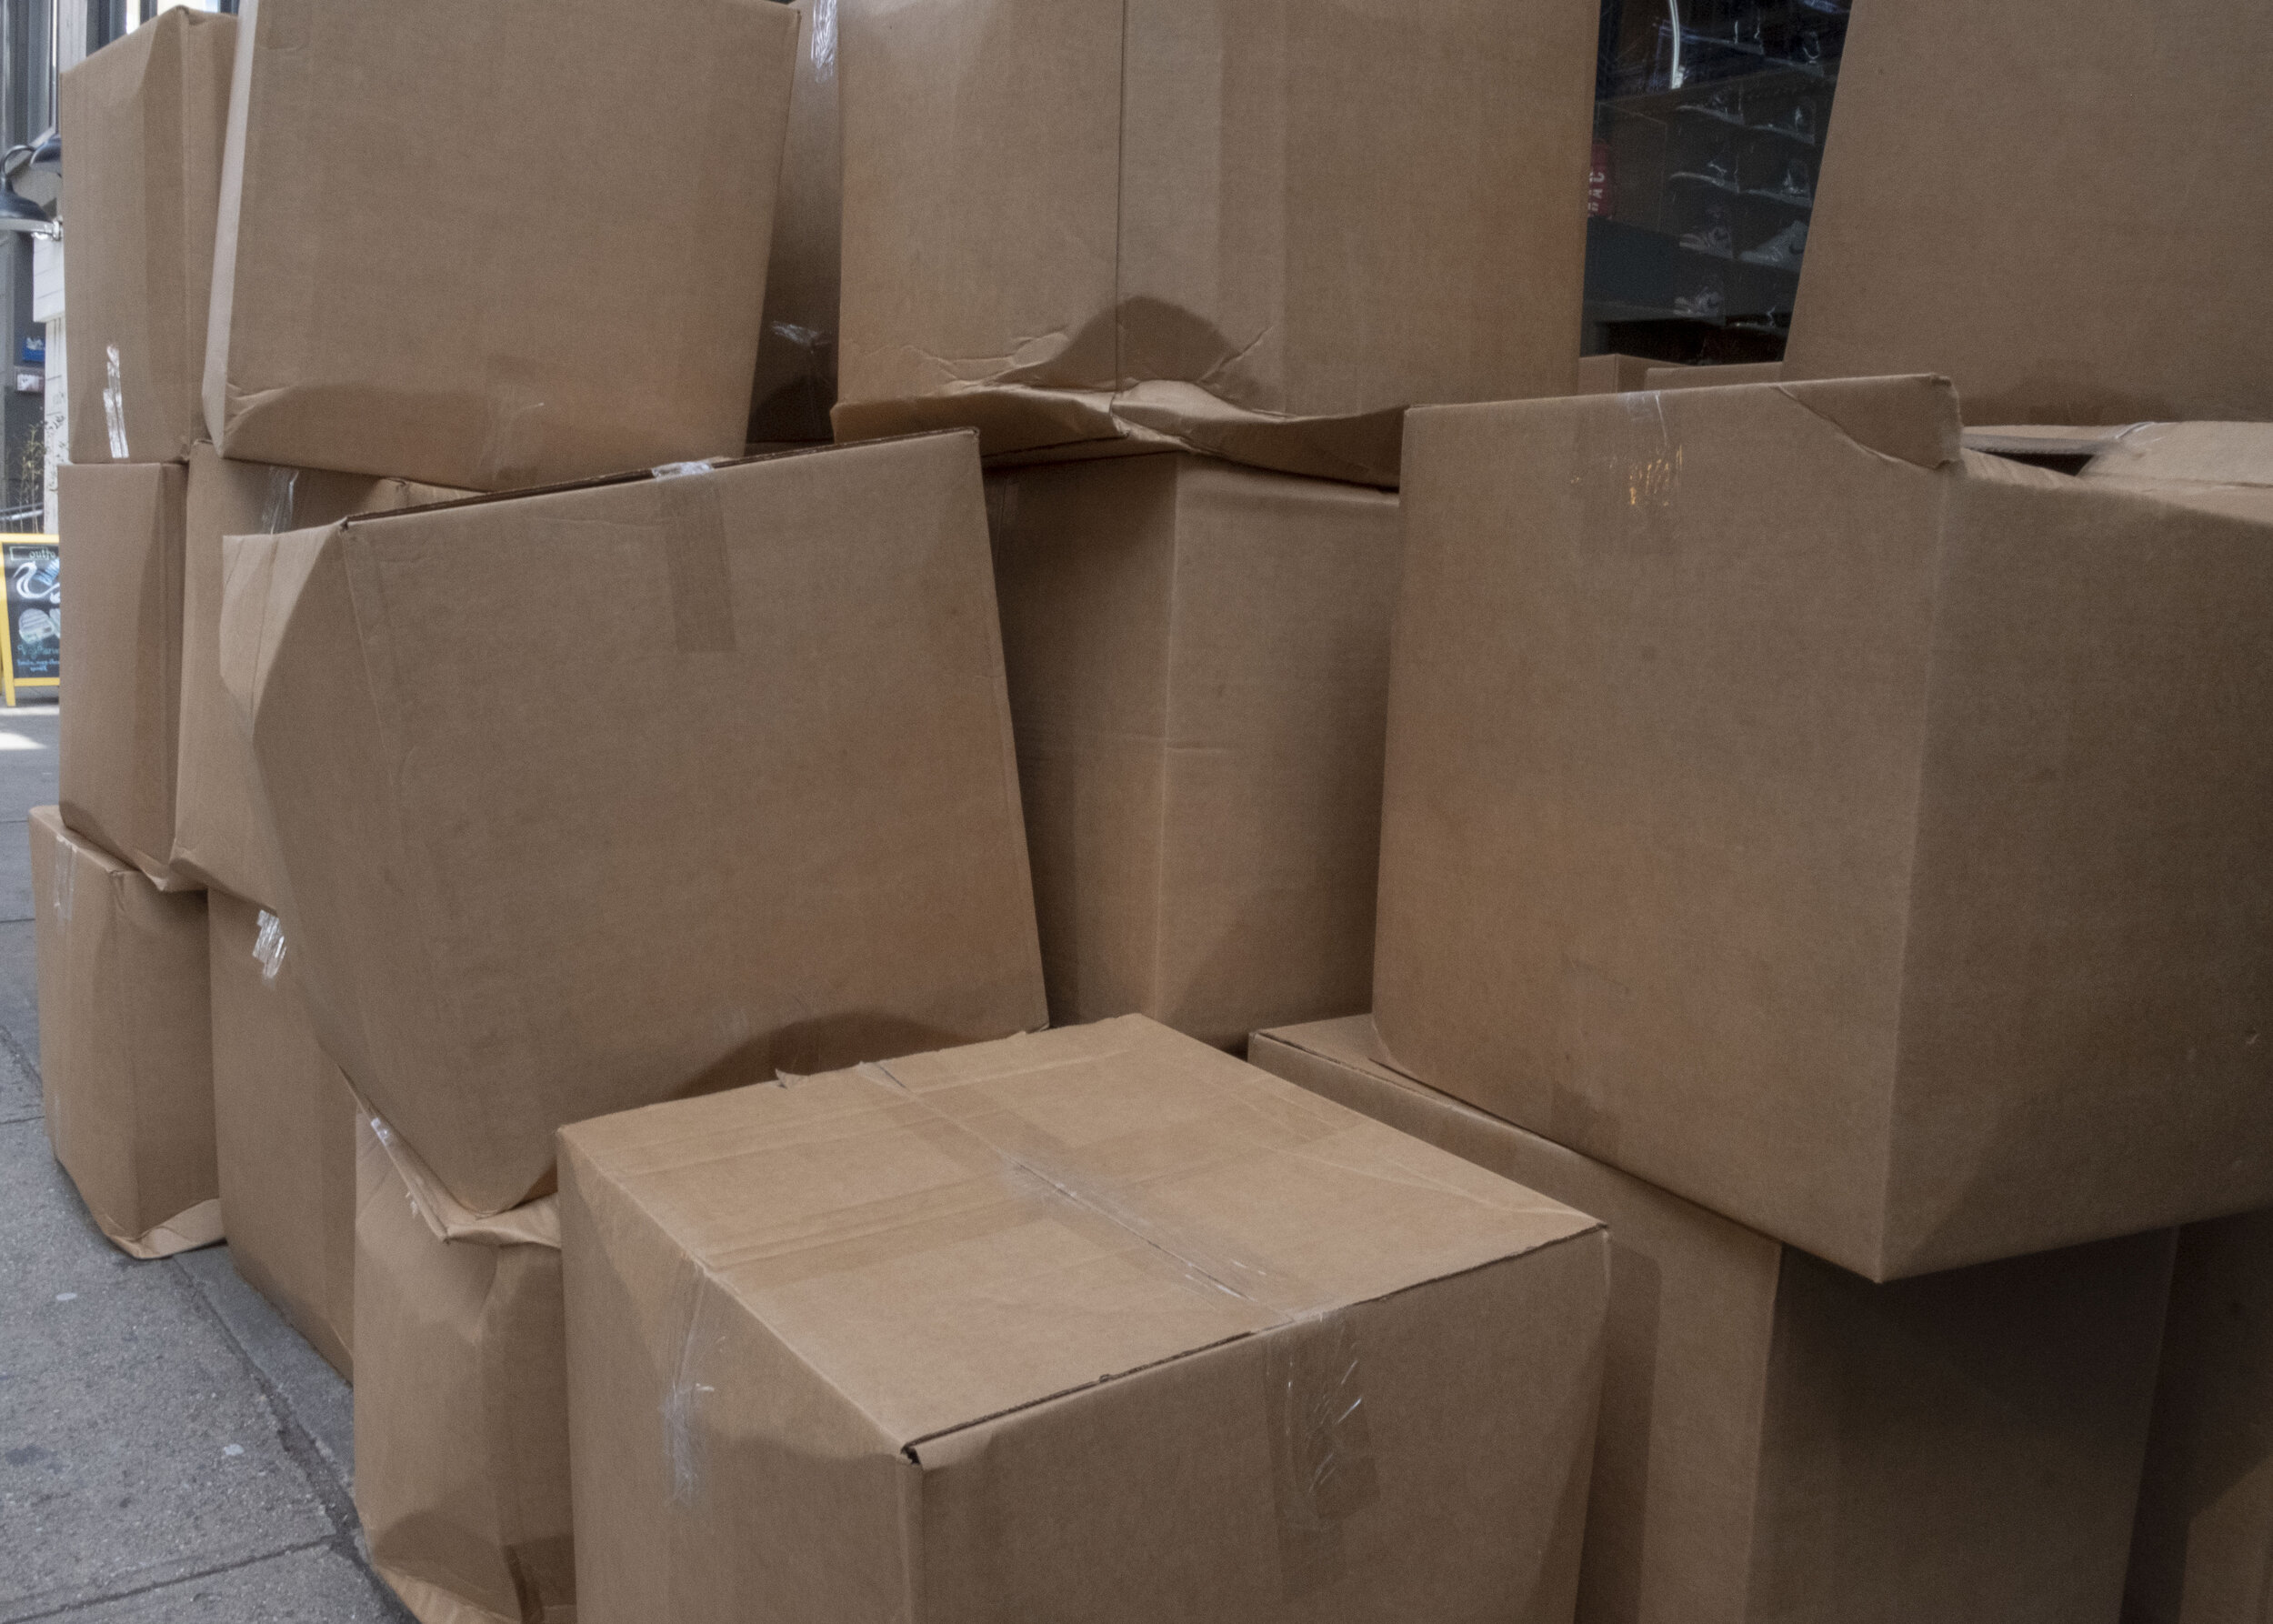 boxes stacked on street.jpg